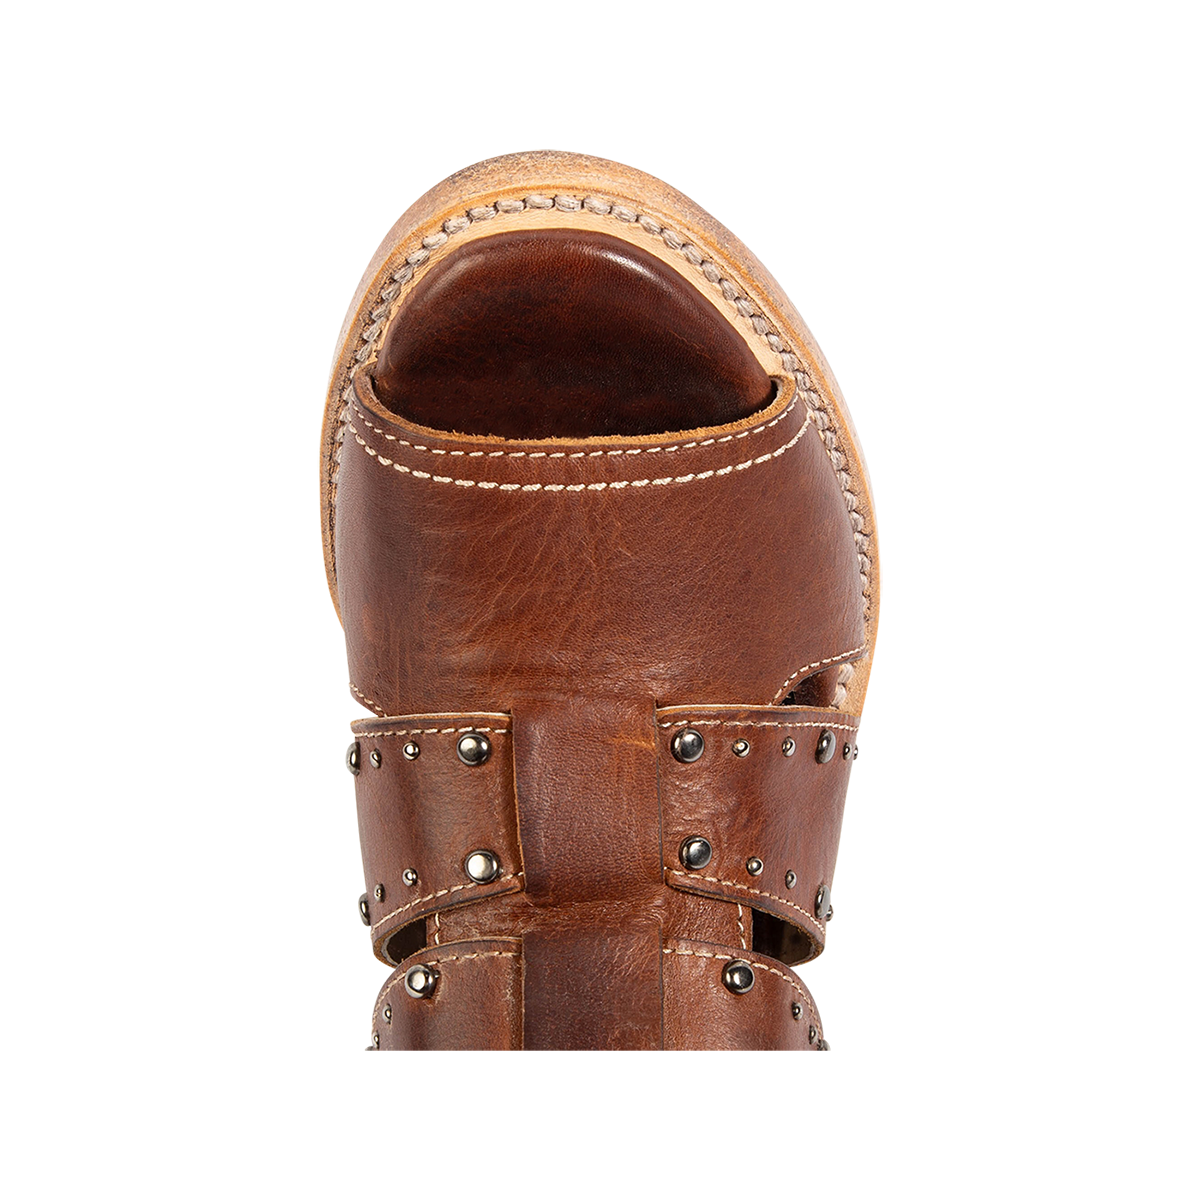 Top view showing a rounded toe and metal embellishments on FREEBIRD women's Ghost tan leather sandal